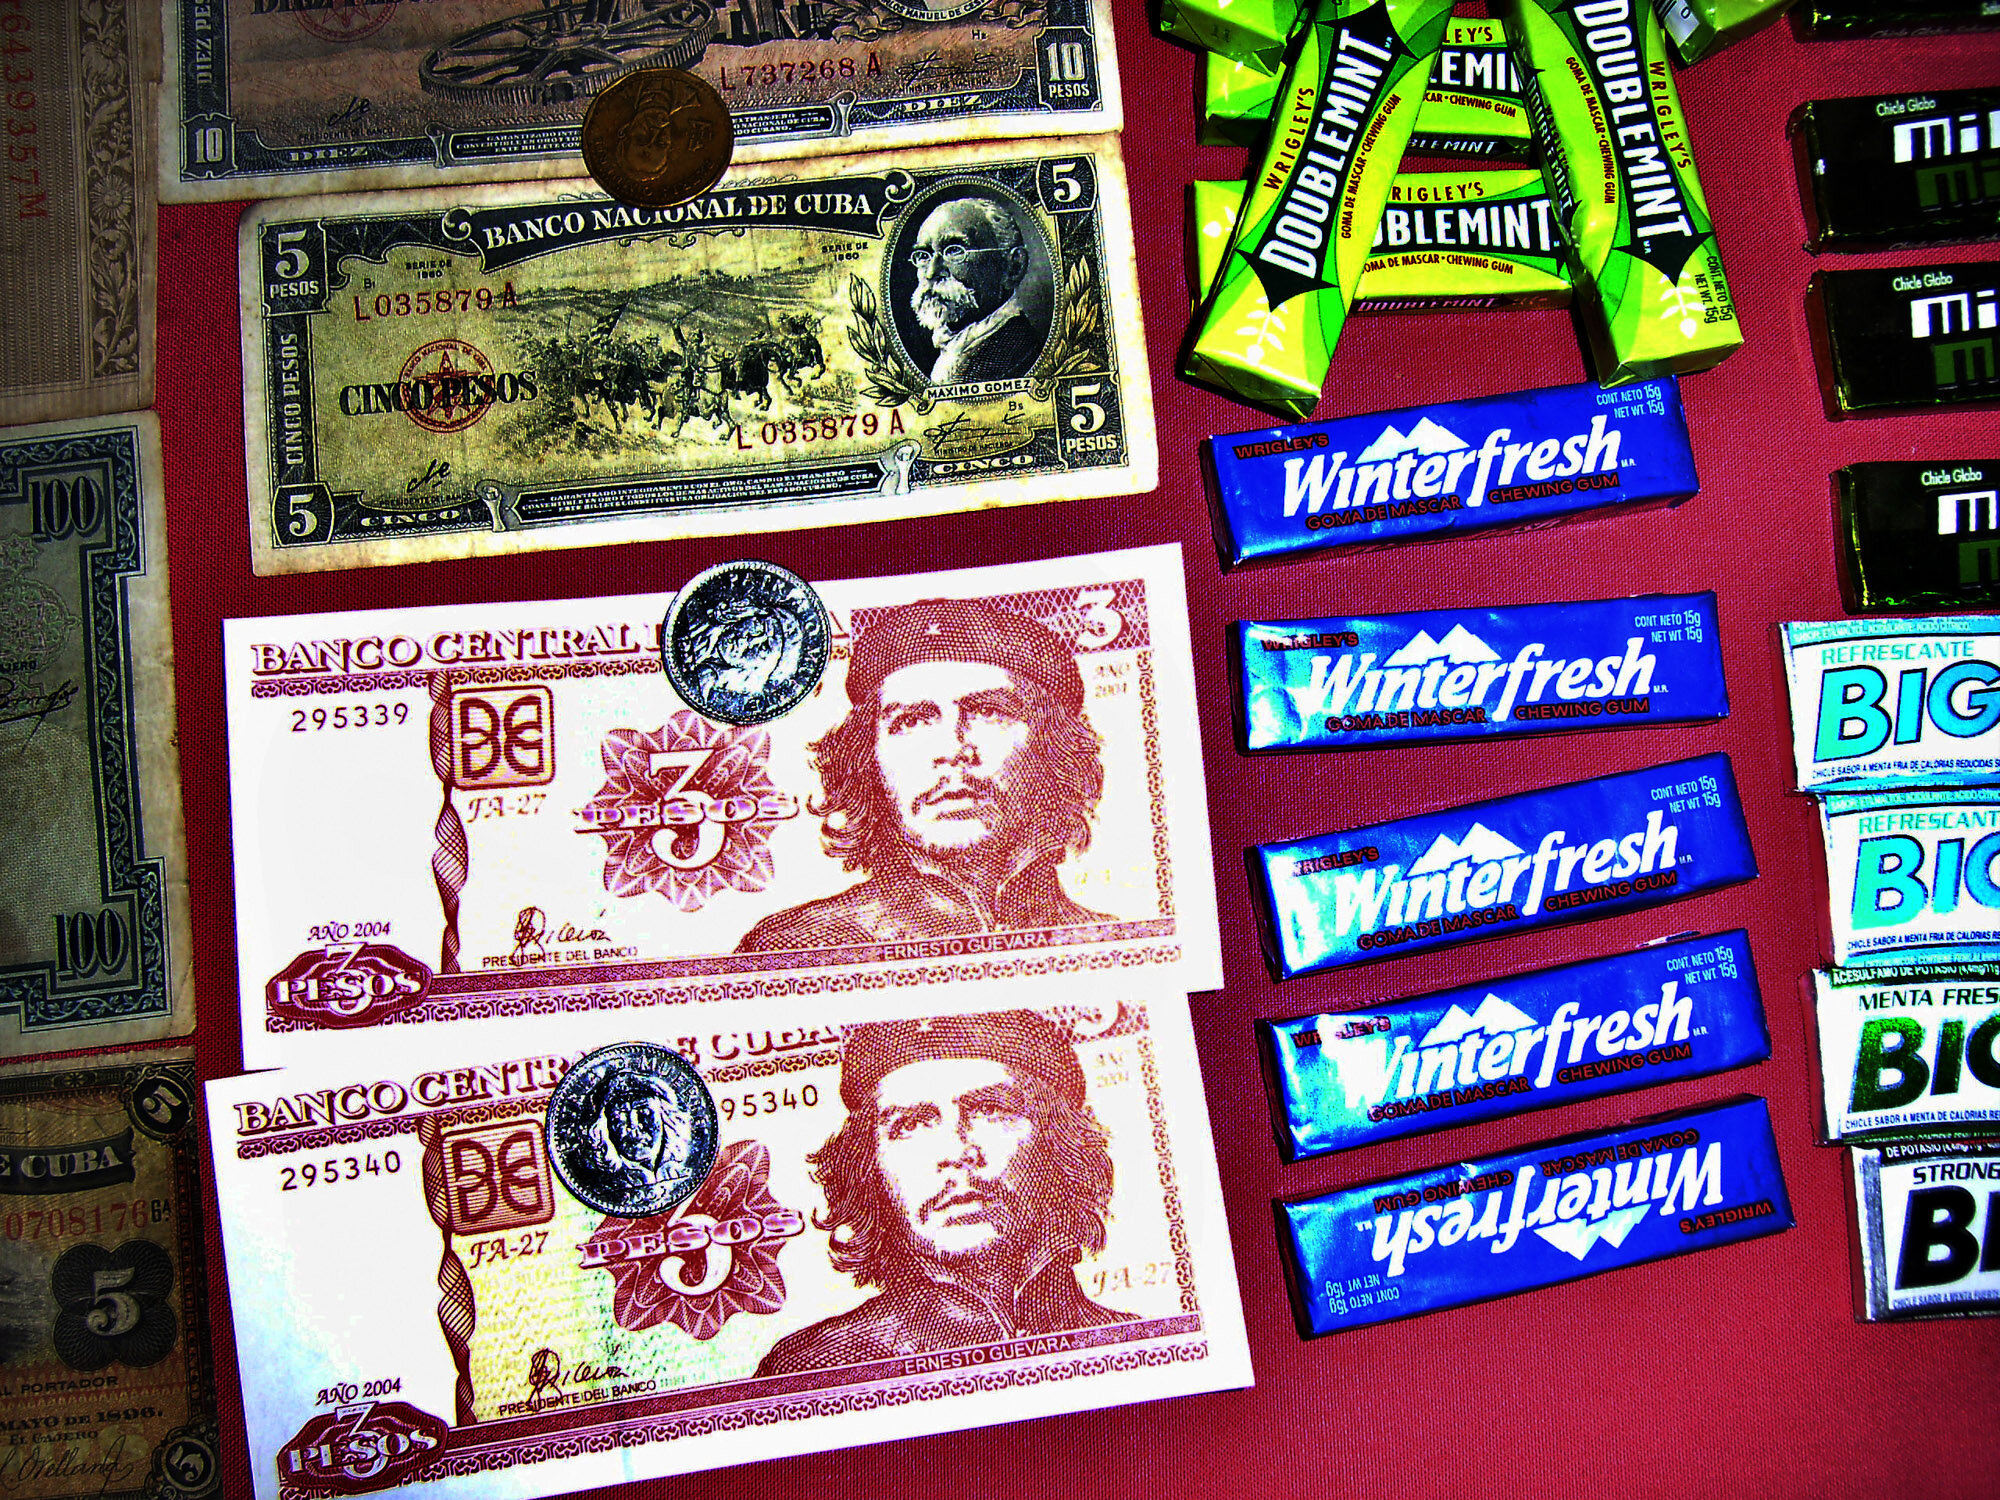  Che Guevar's image on the 3 Peso banknotes and coins of the Cuban Peso, next to chewing gum for sale in a restaurant. 